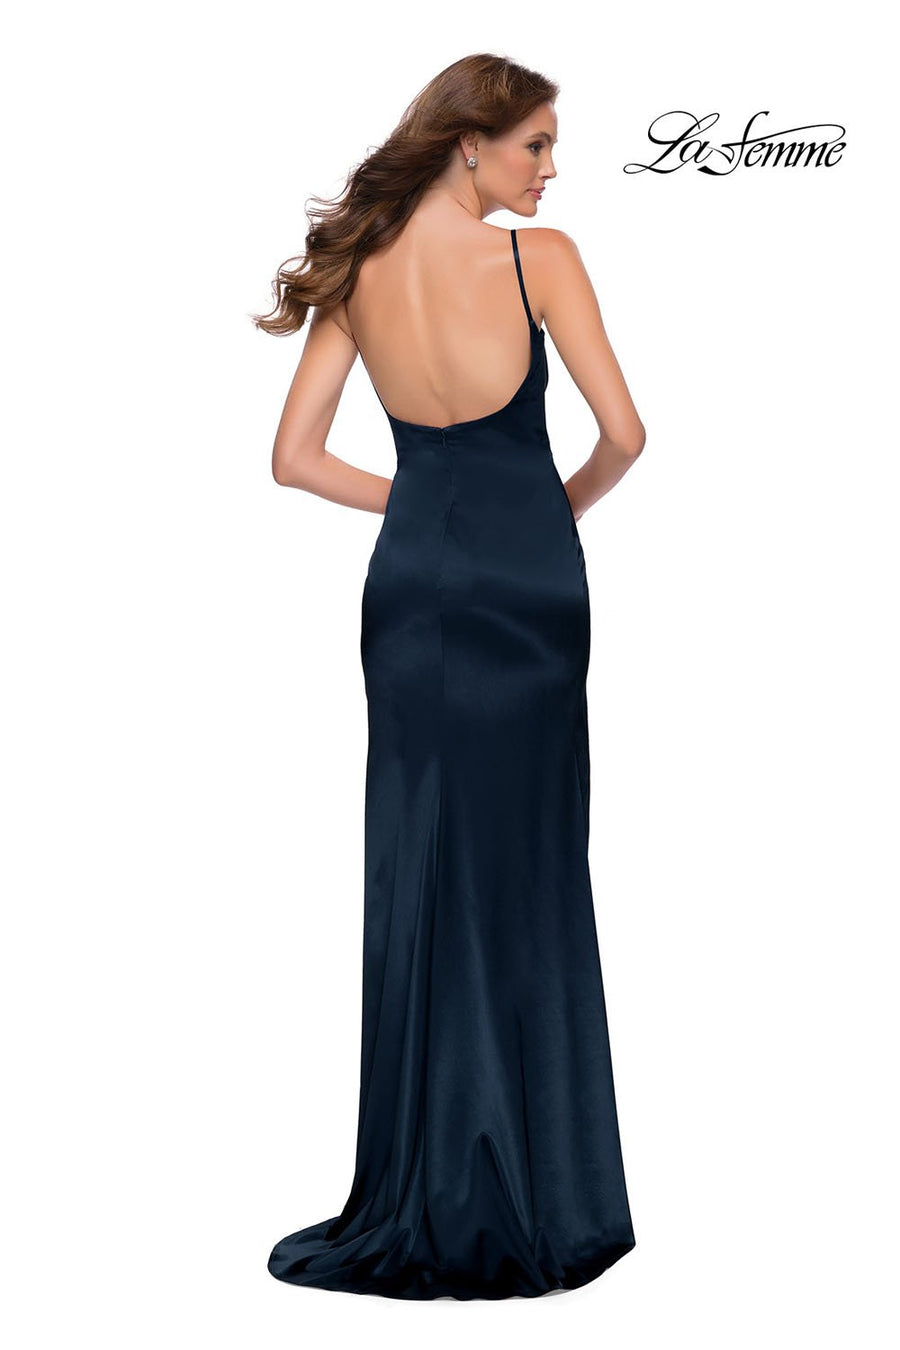 La Femme 29945 prom dress images.  La Femme 29945 is available in these colors: Burgundy, Navy, White.